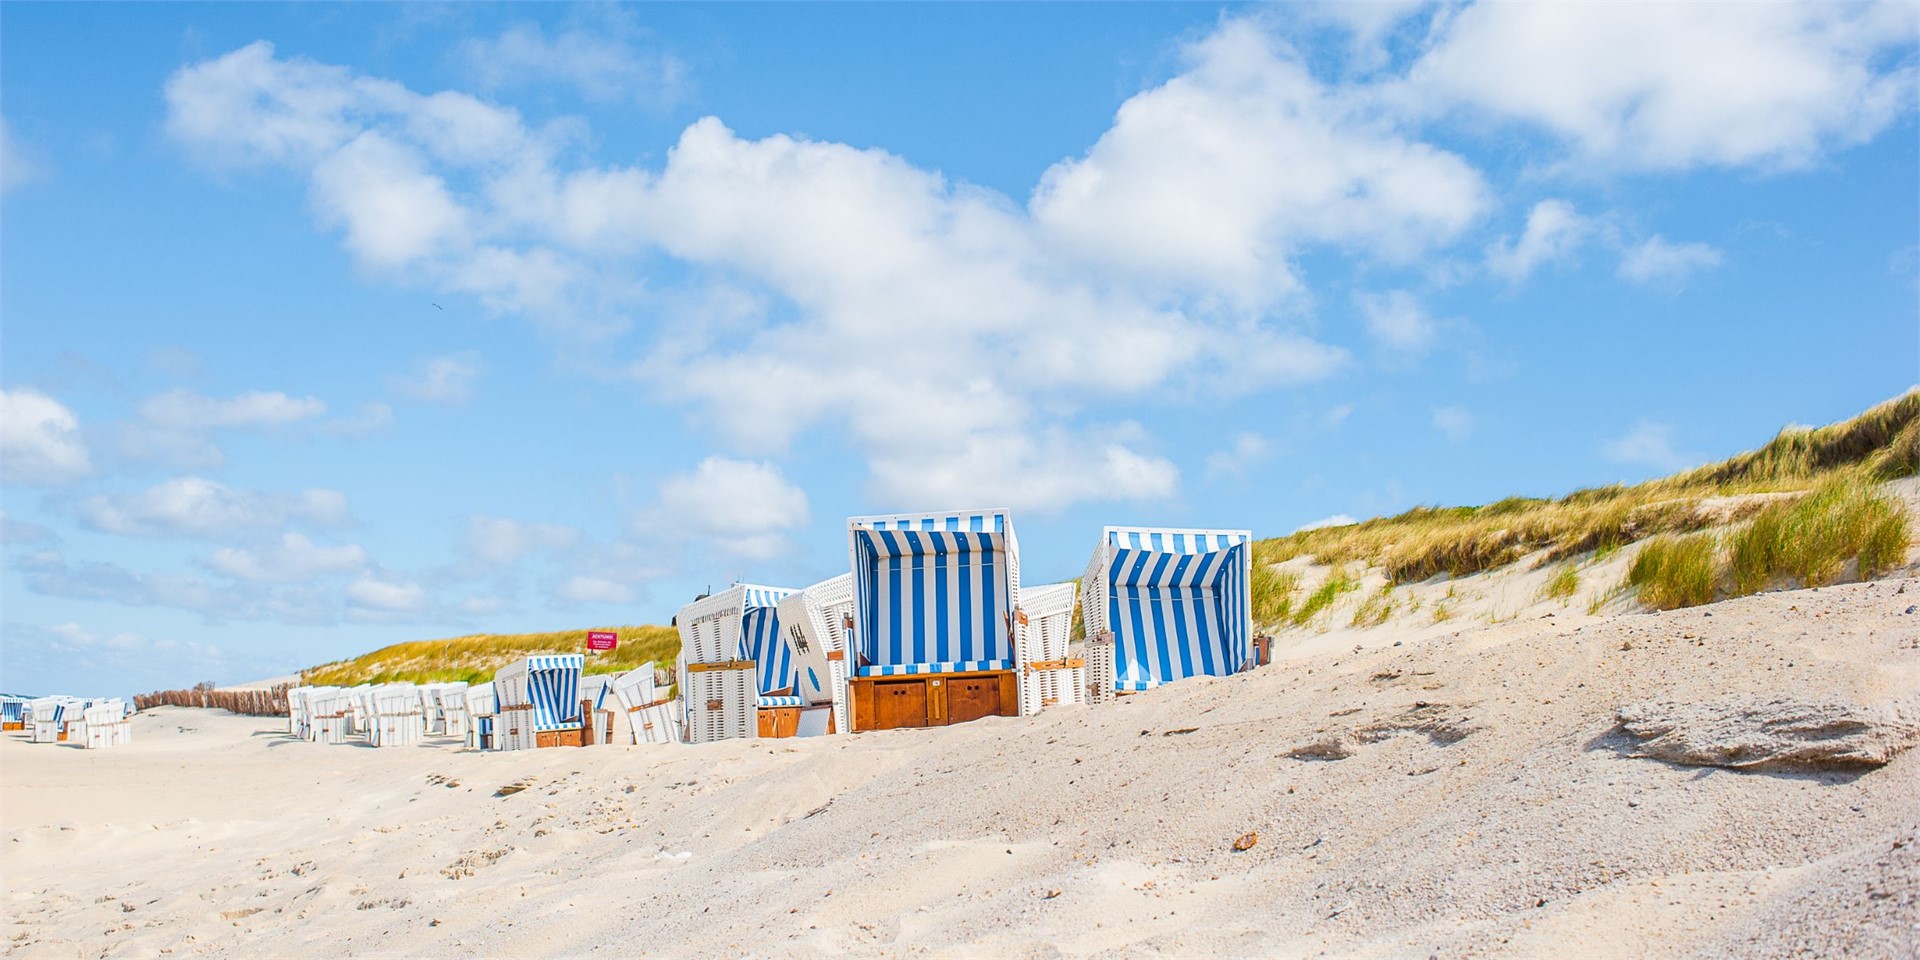 Book your trip to the Biikebrennen on Sylt